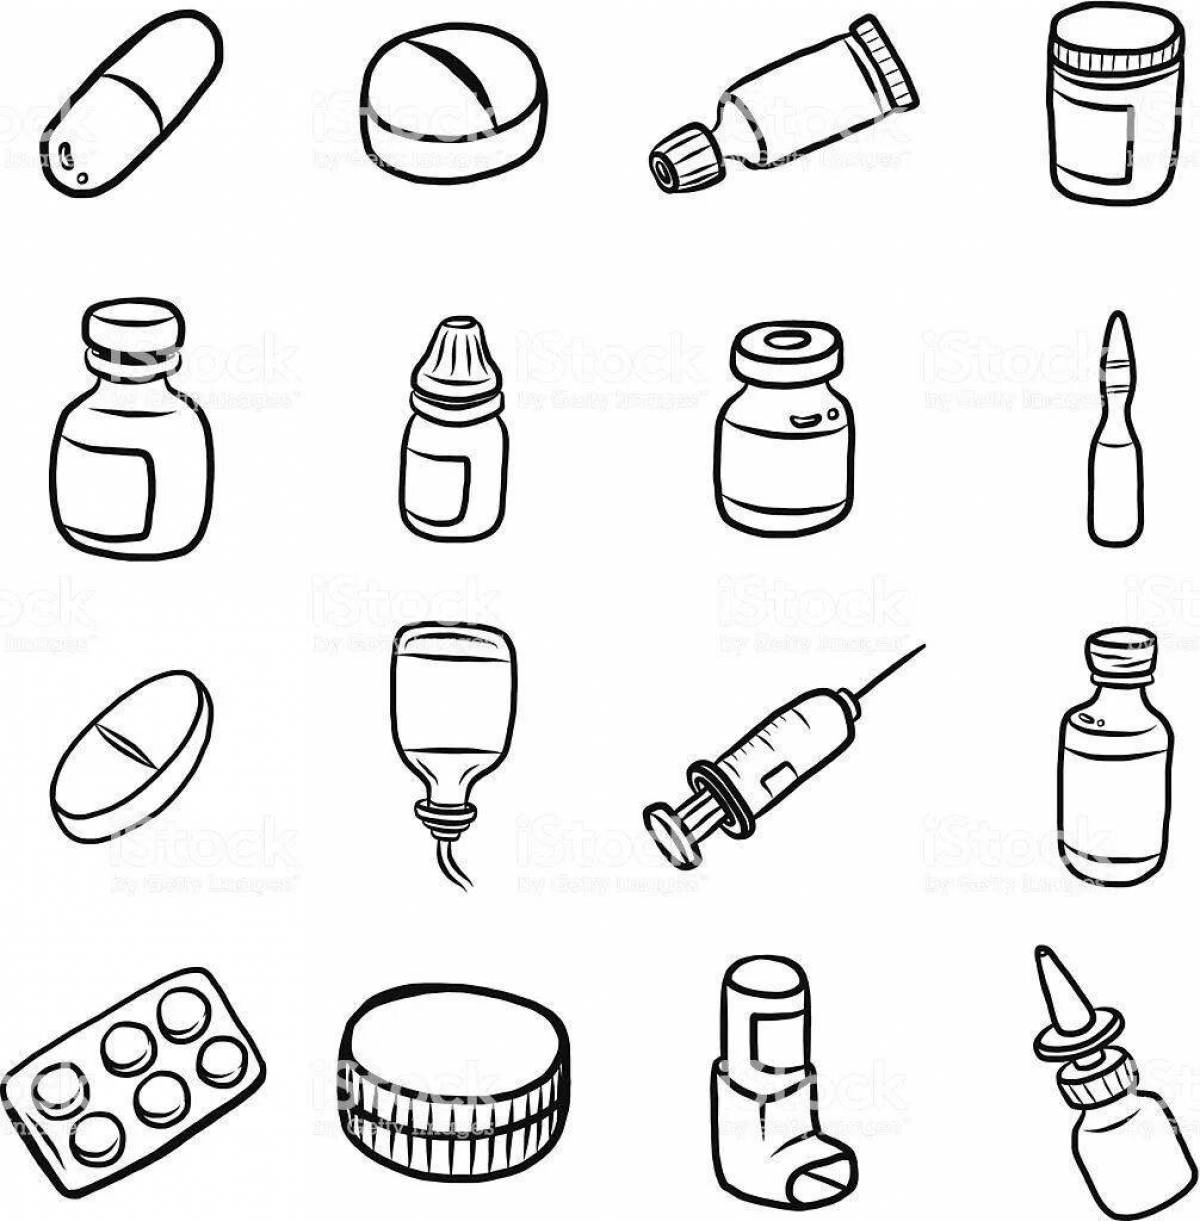 Coloring book innovative drugs